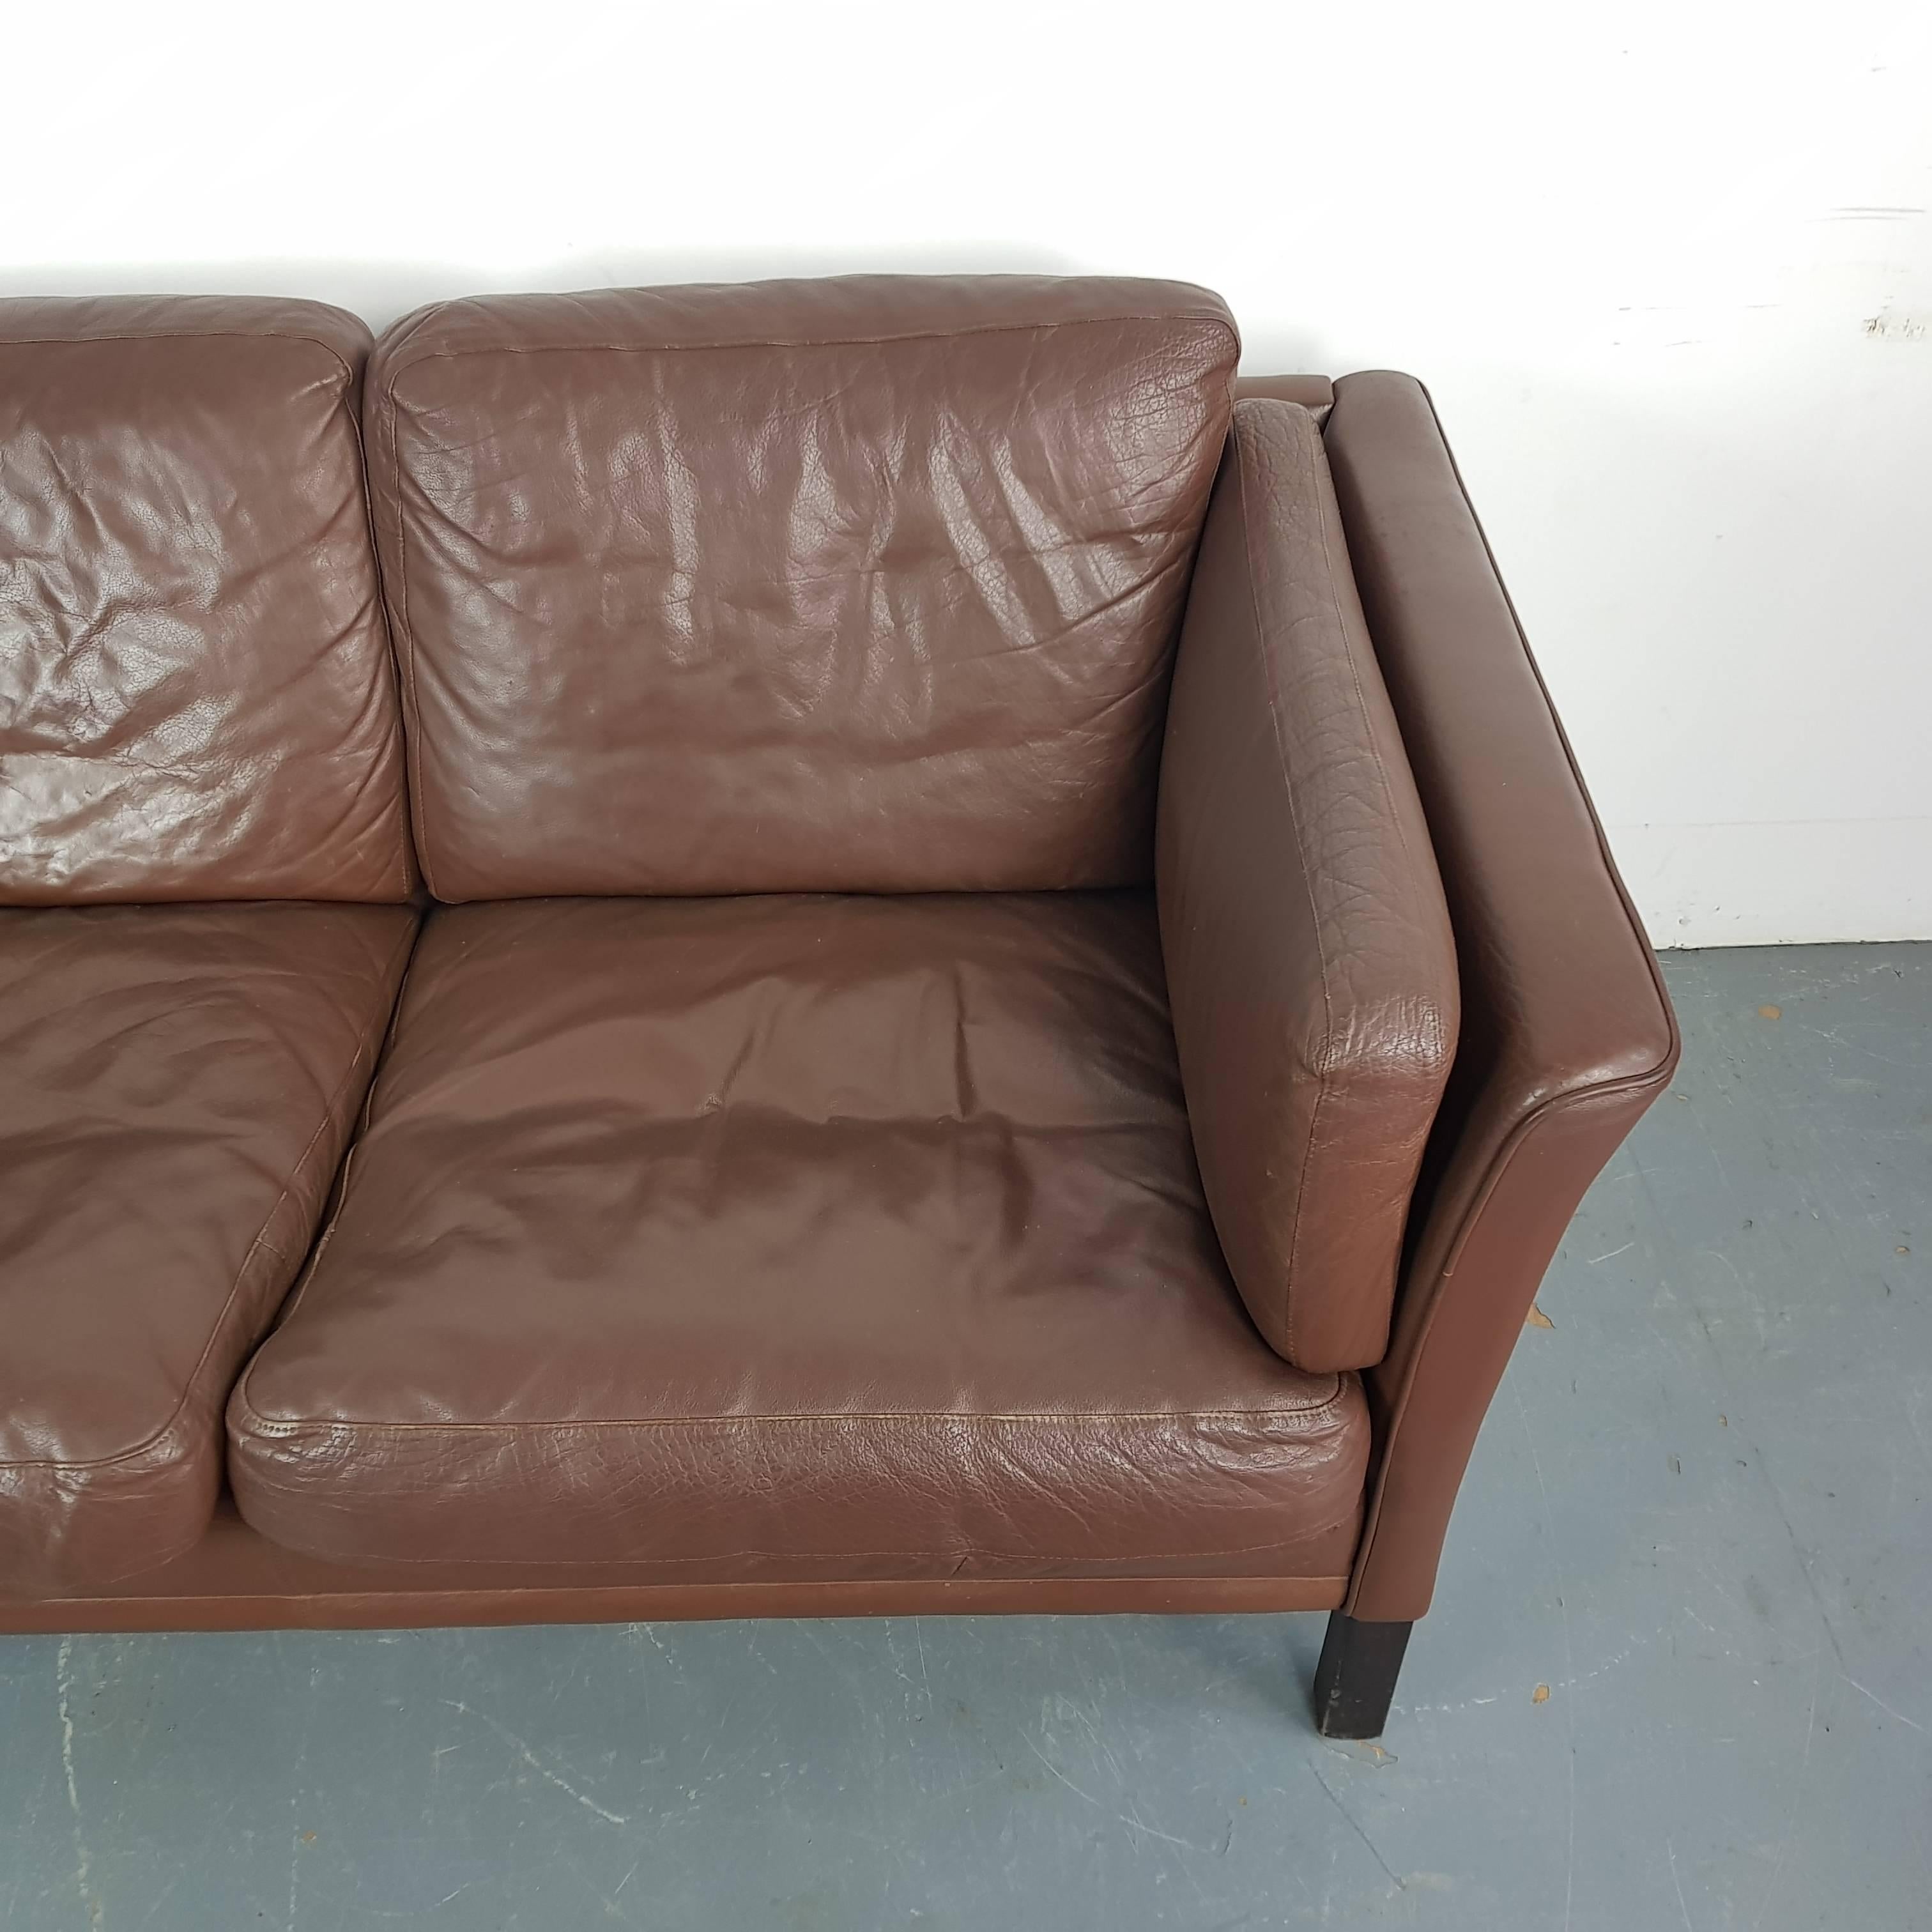 1970s Chestnut Brown Leather Mogensen Style Two-Seat Sofa In Good Condition For Sale In Lewes, East Sussex